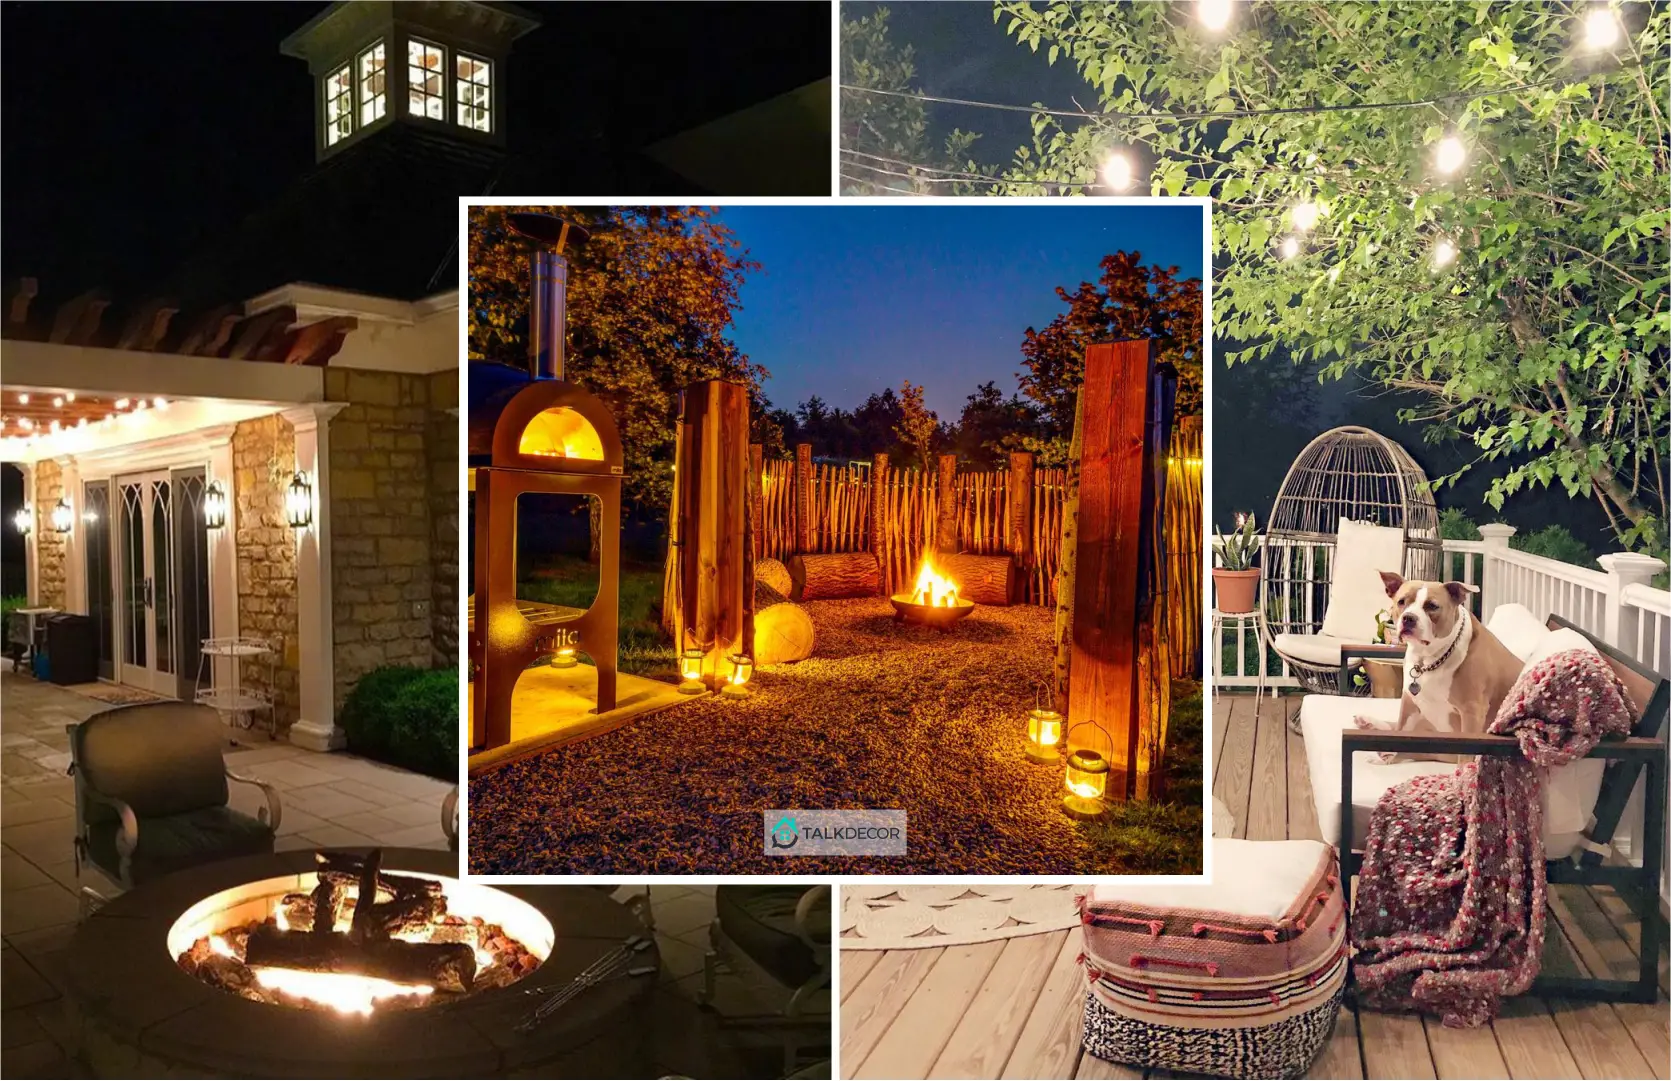 How to Install Proper Firepit for Your Outdoor Summer Night